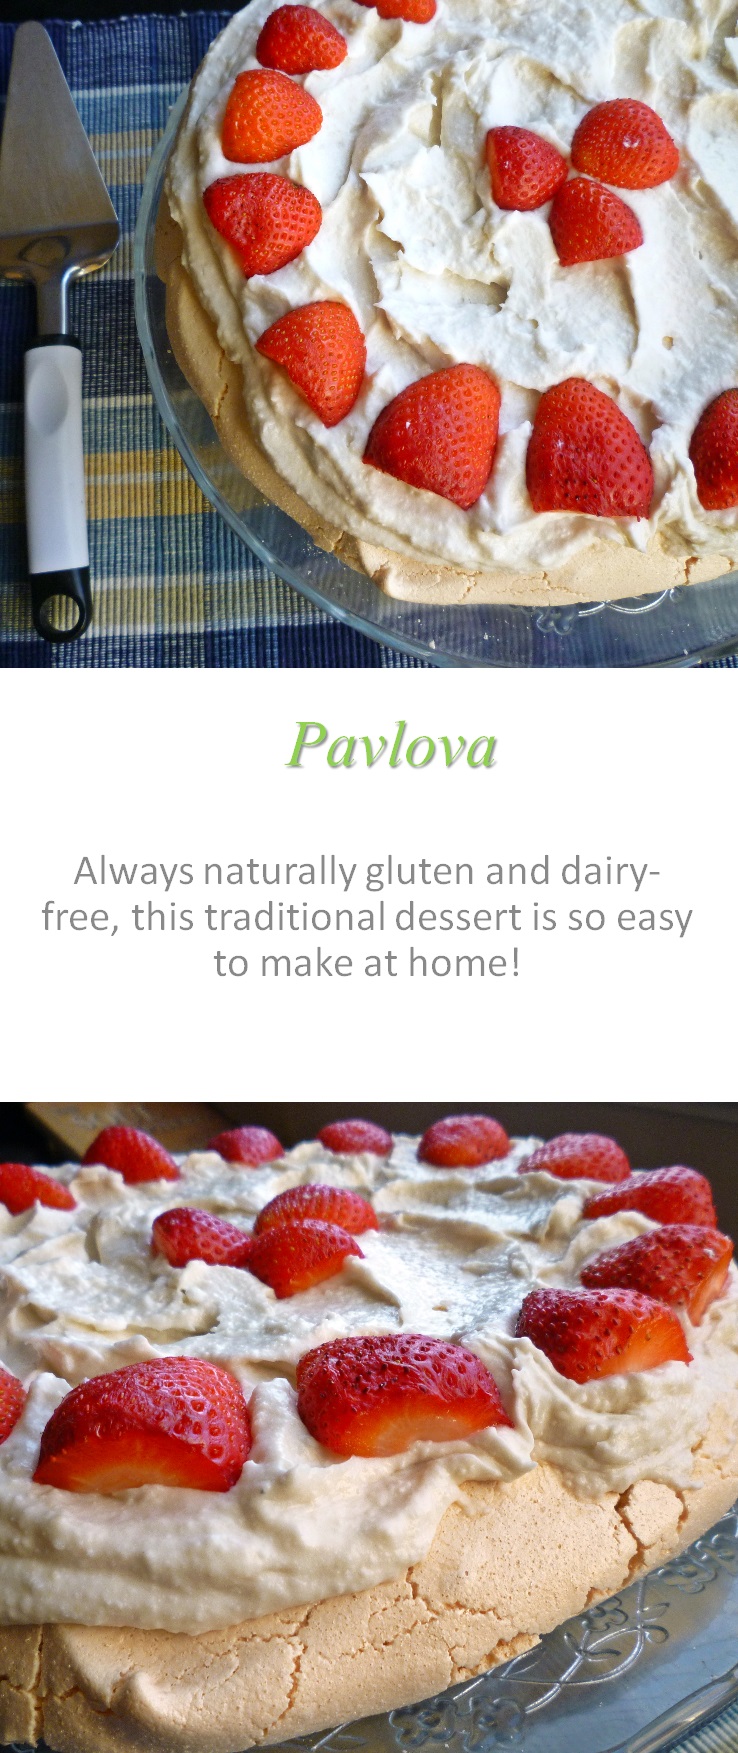 Who knew Pavlova was so easy to make at home? This naturally gluten and dairy-free dessert is easy enough for a child to make! #pavlova